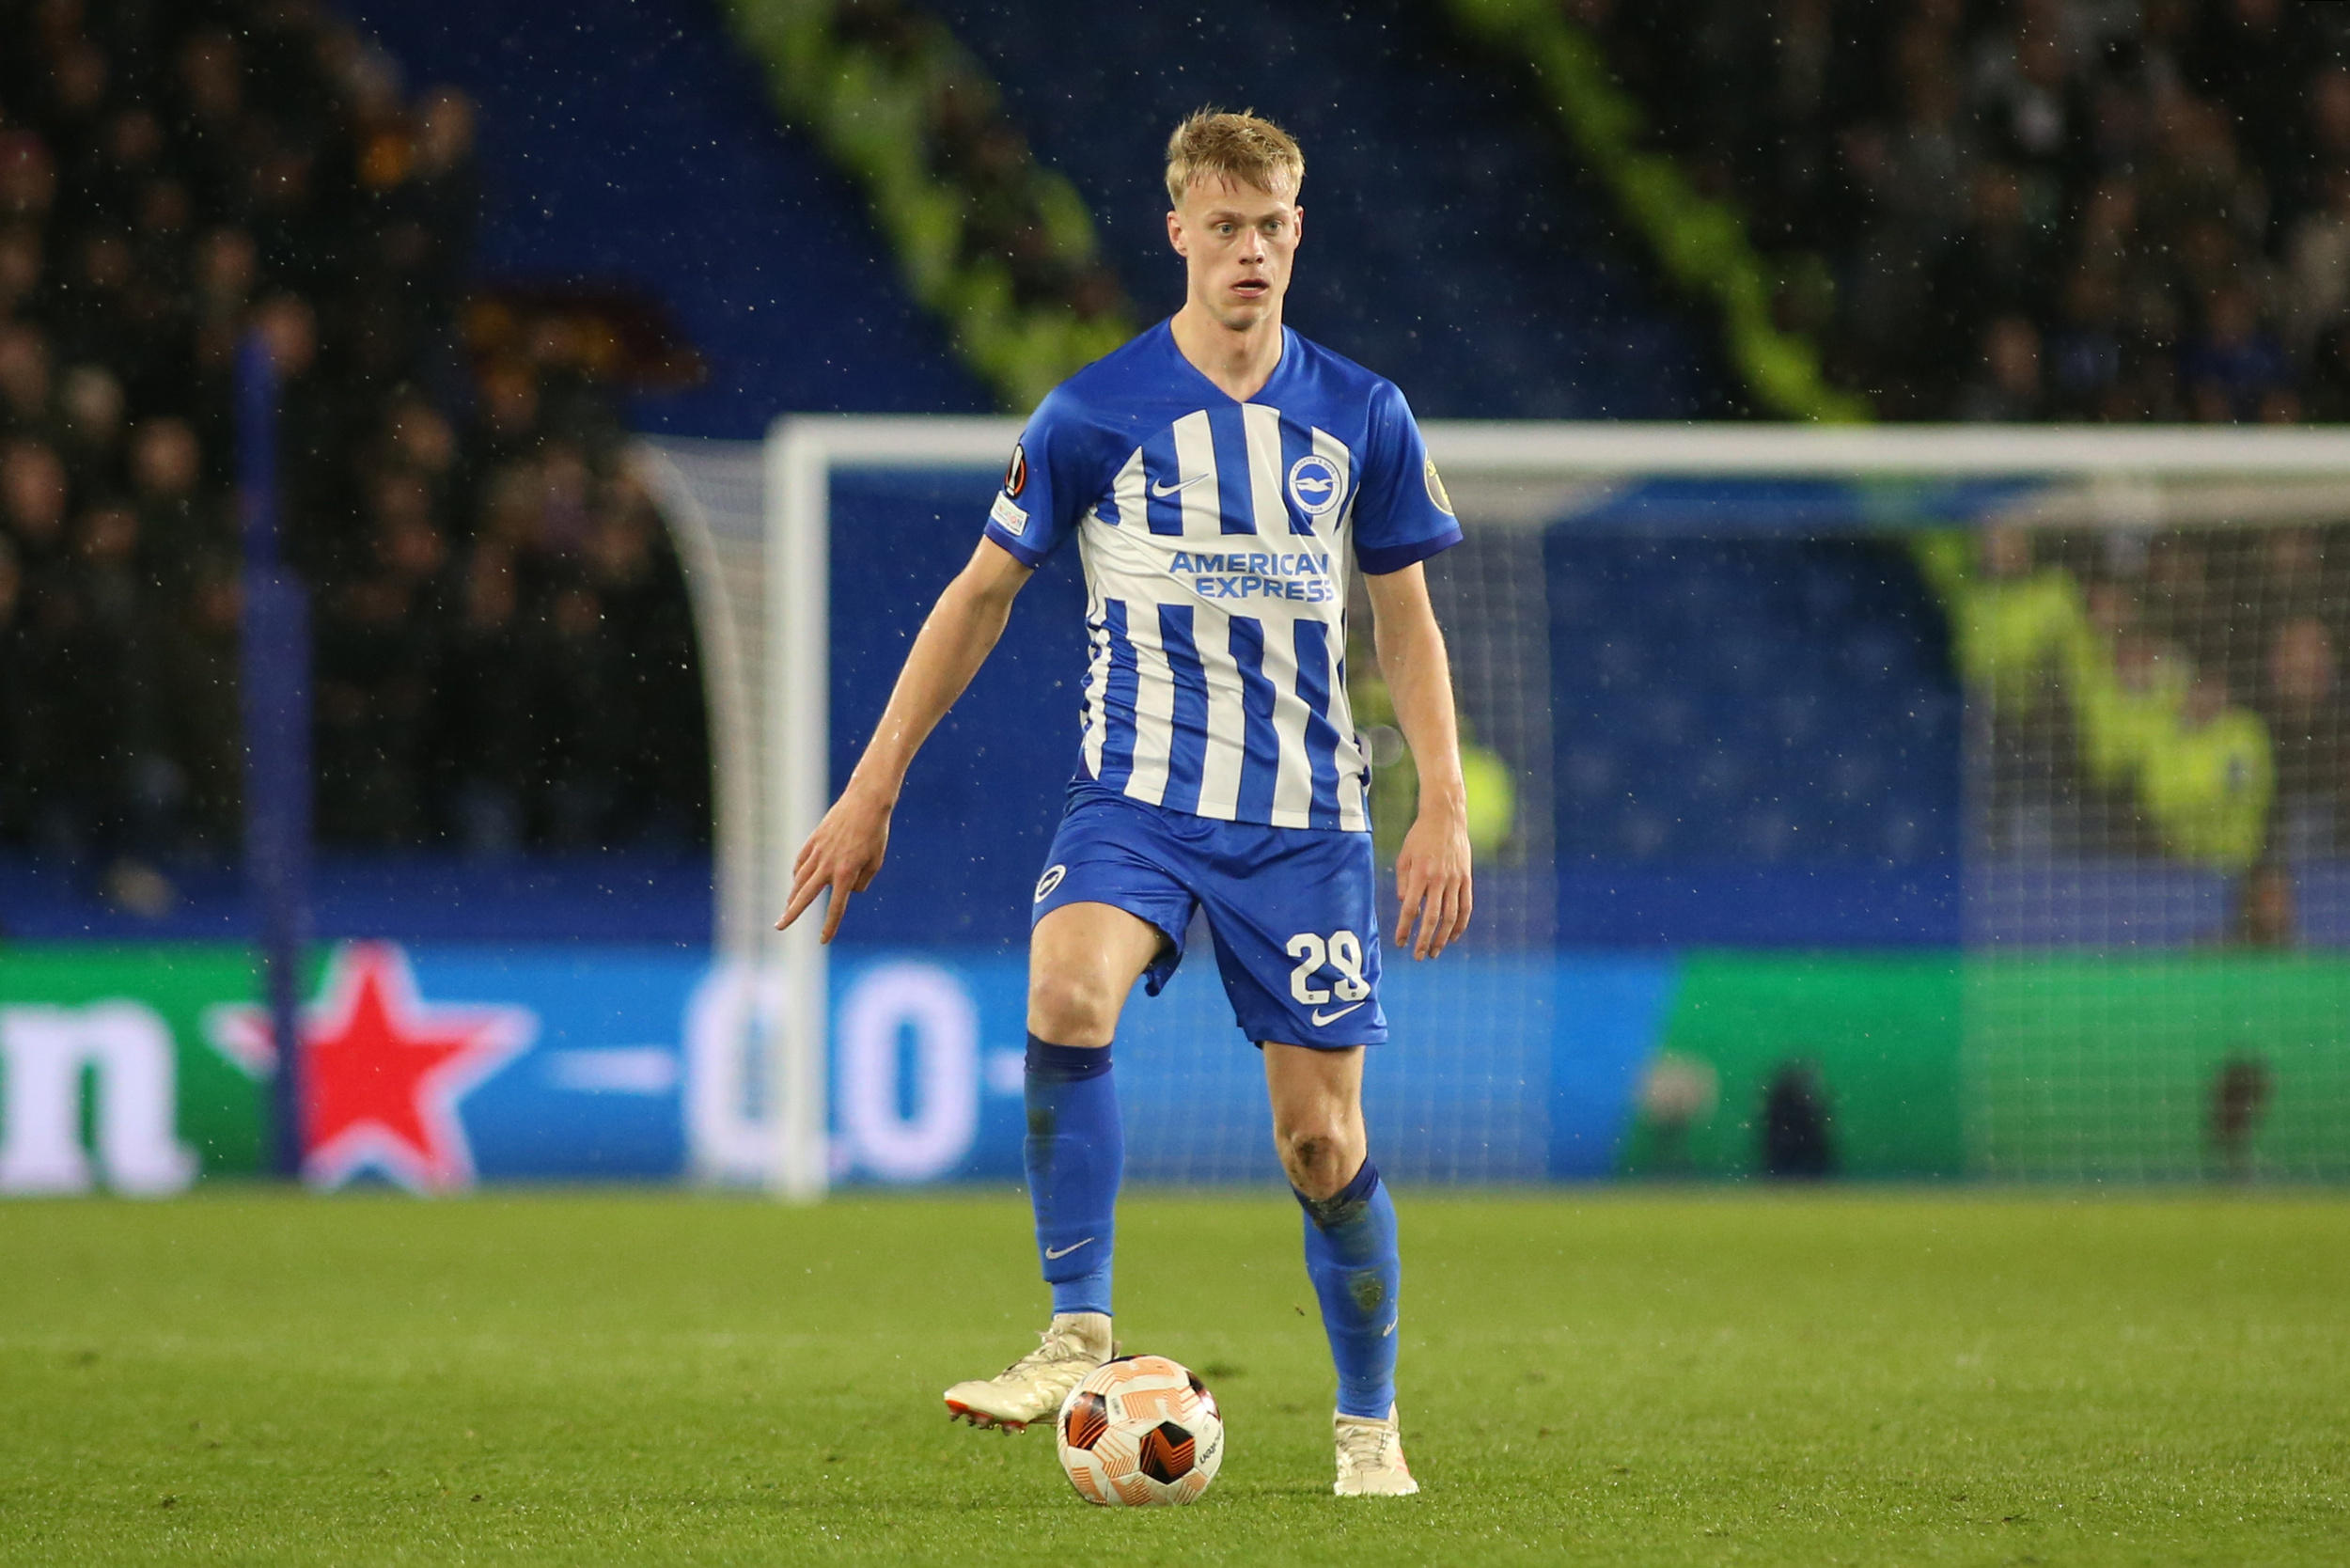 another brighton player now under consideration by chelsea according to journalist